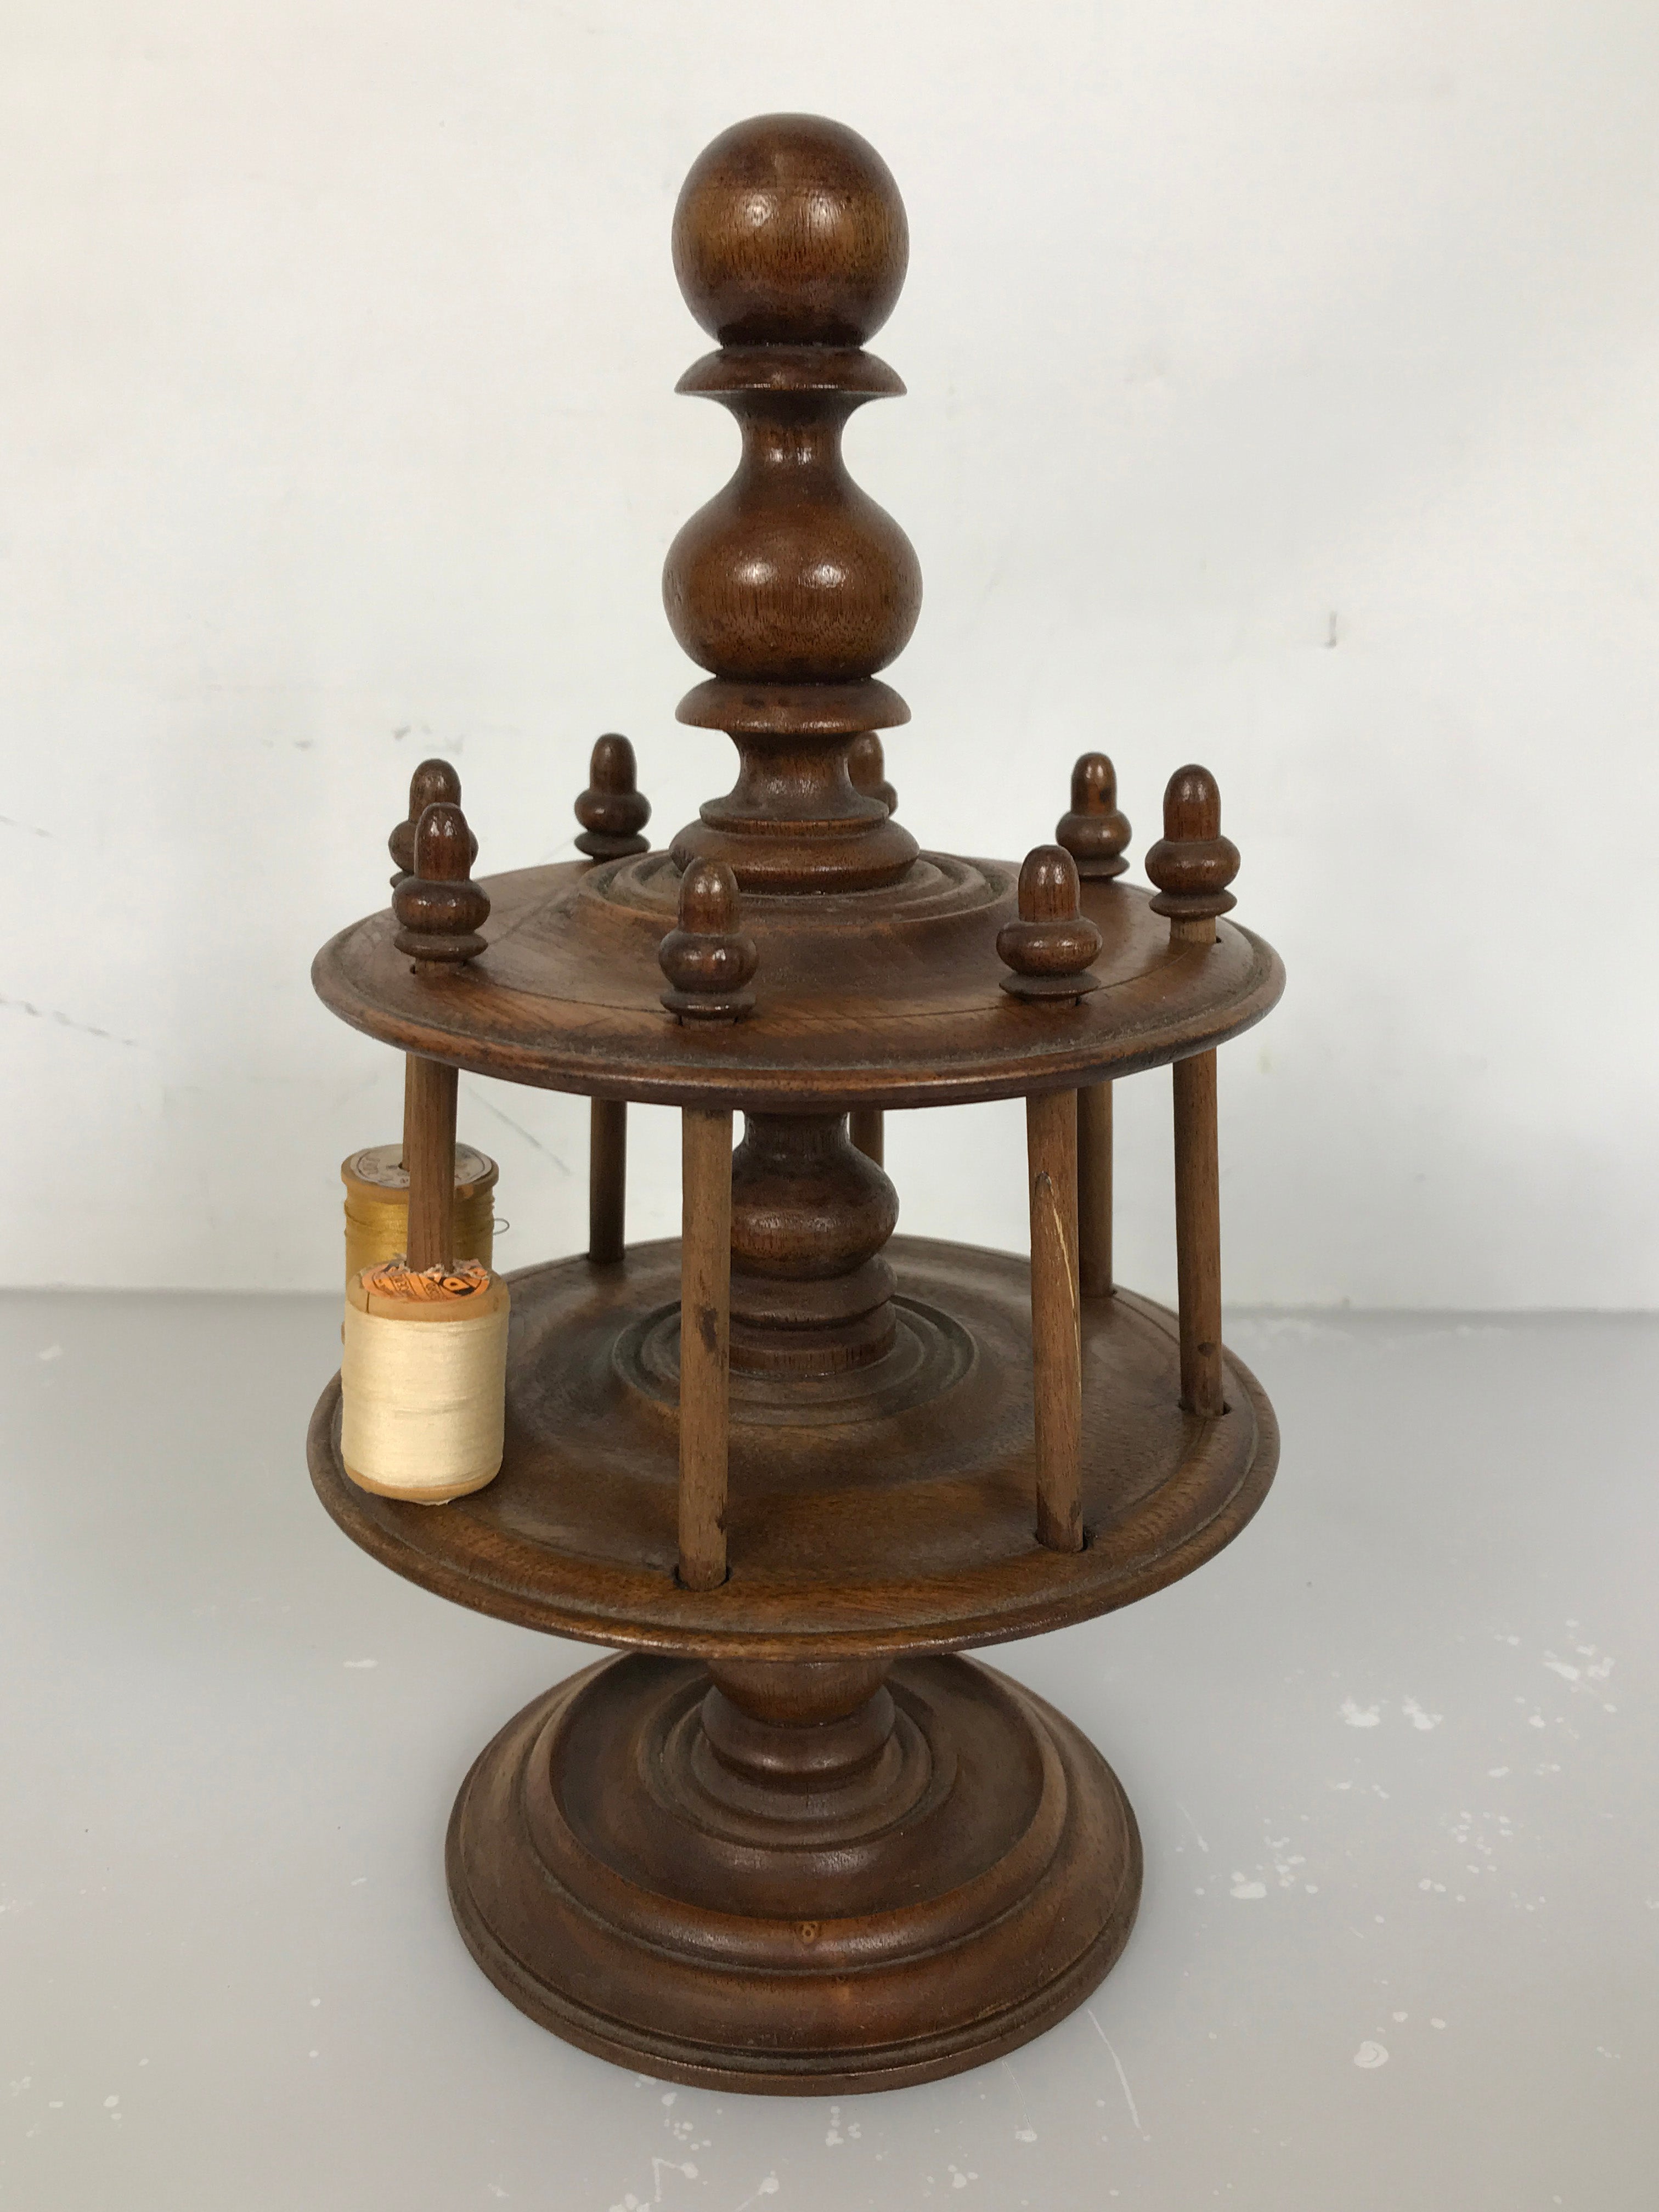 Revolving Cotton Reel Holder In The Shape Of A Table in Antique Treen